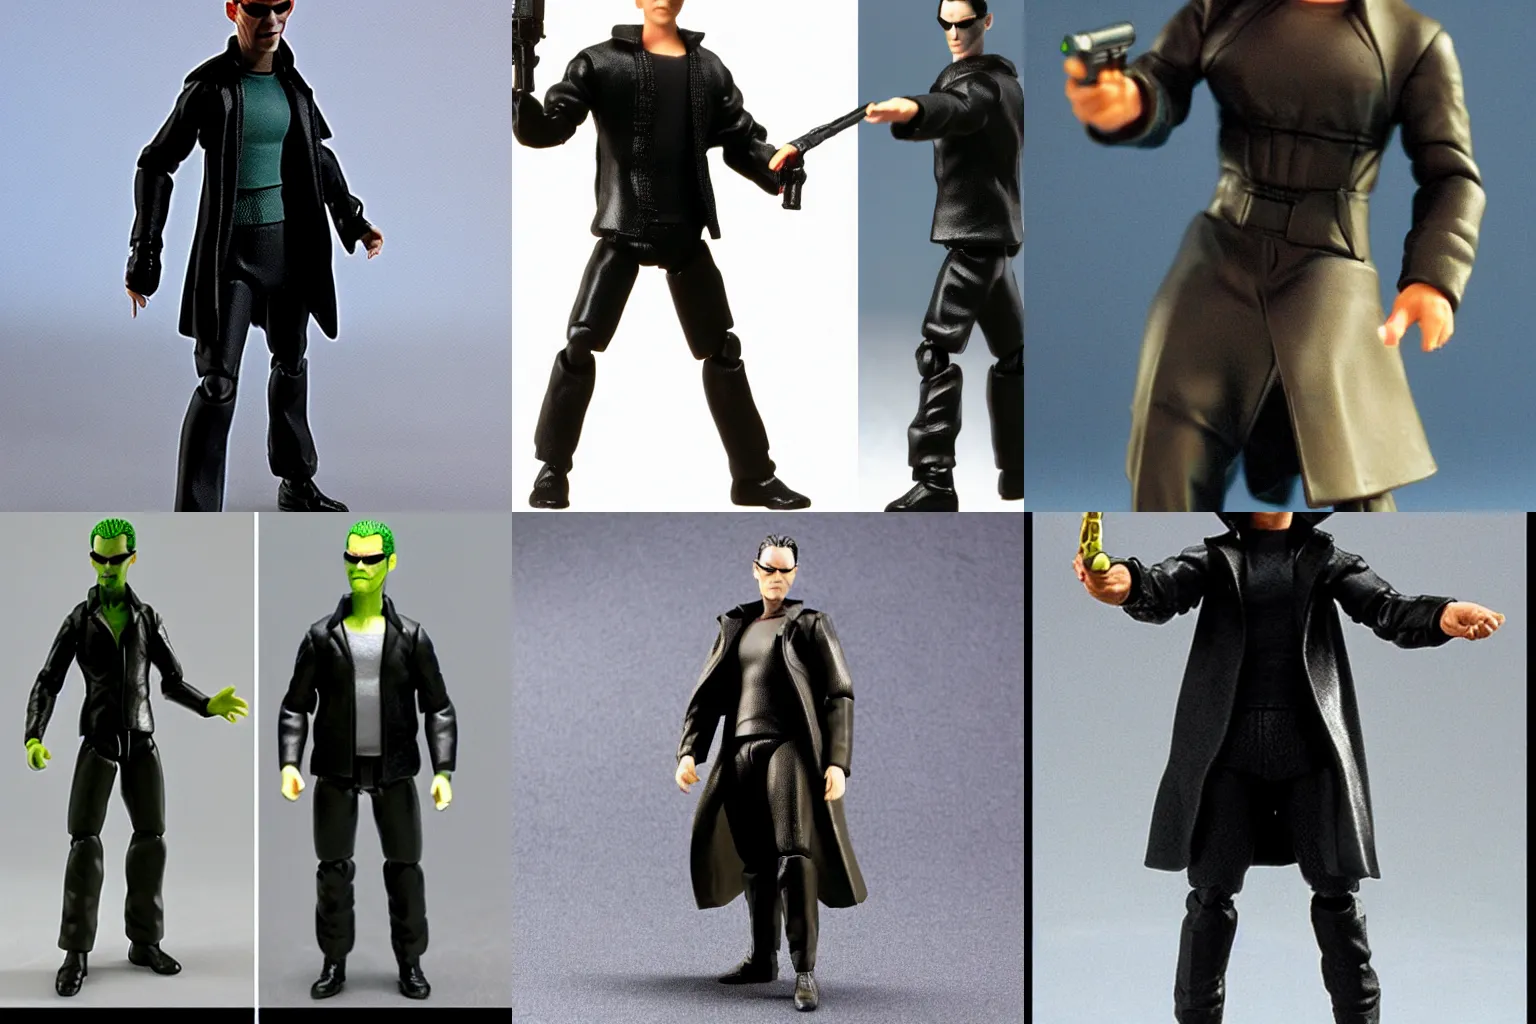 Prompt: Action figure of Neo from the matrix